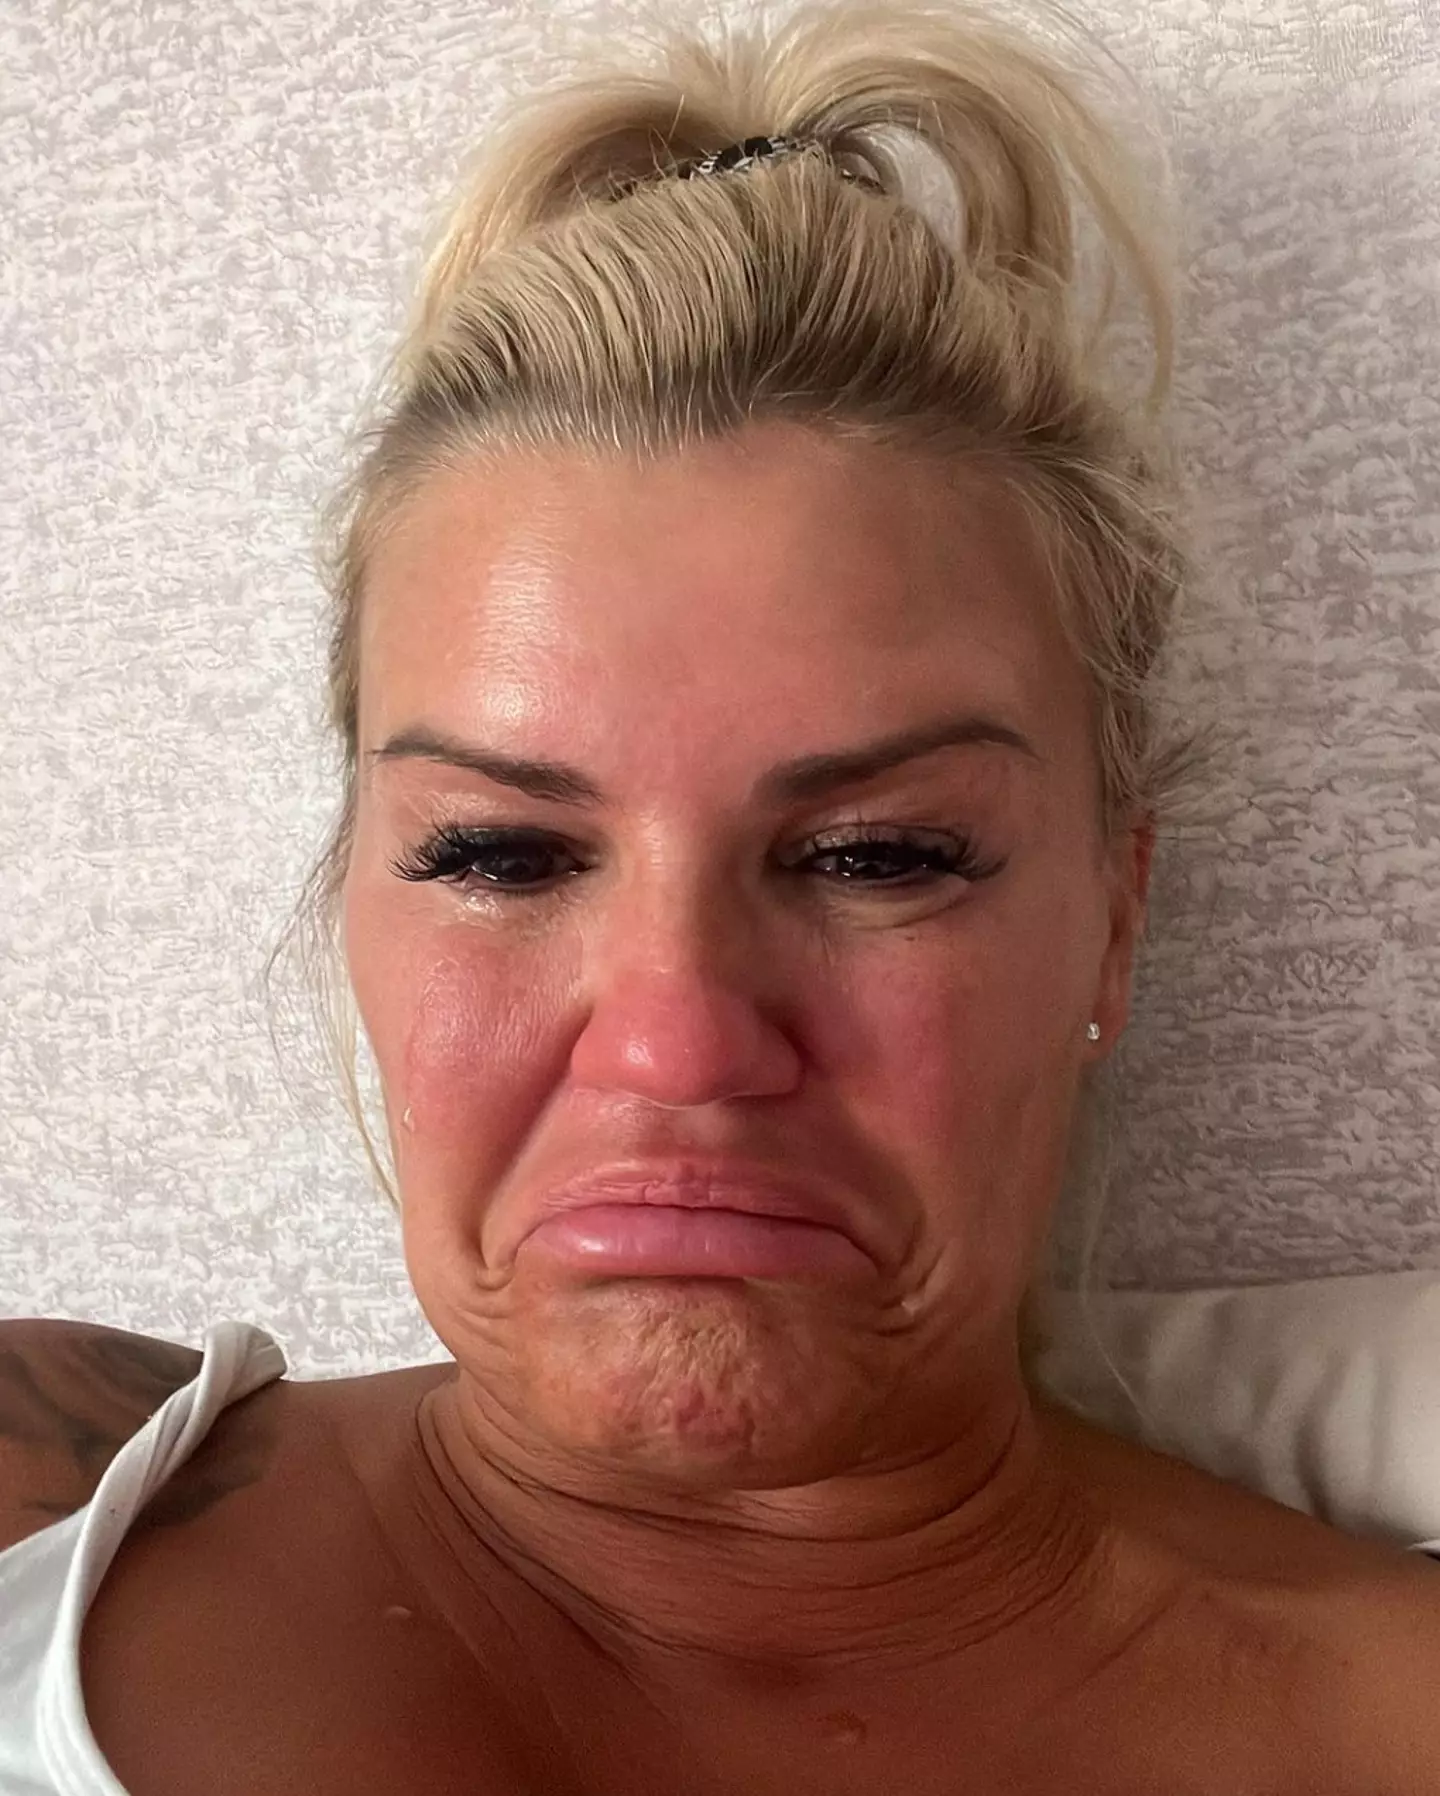 Kerry Katona was brought to tears over the brand-new Beckham Netflix doc.